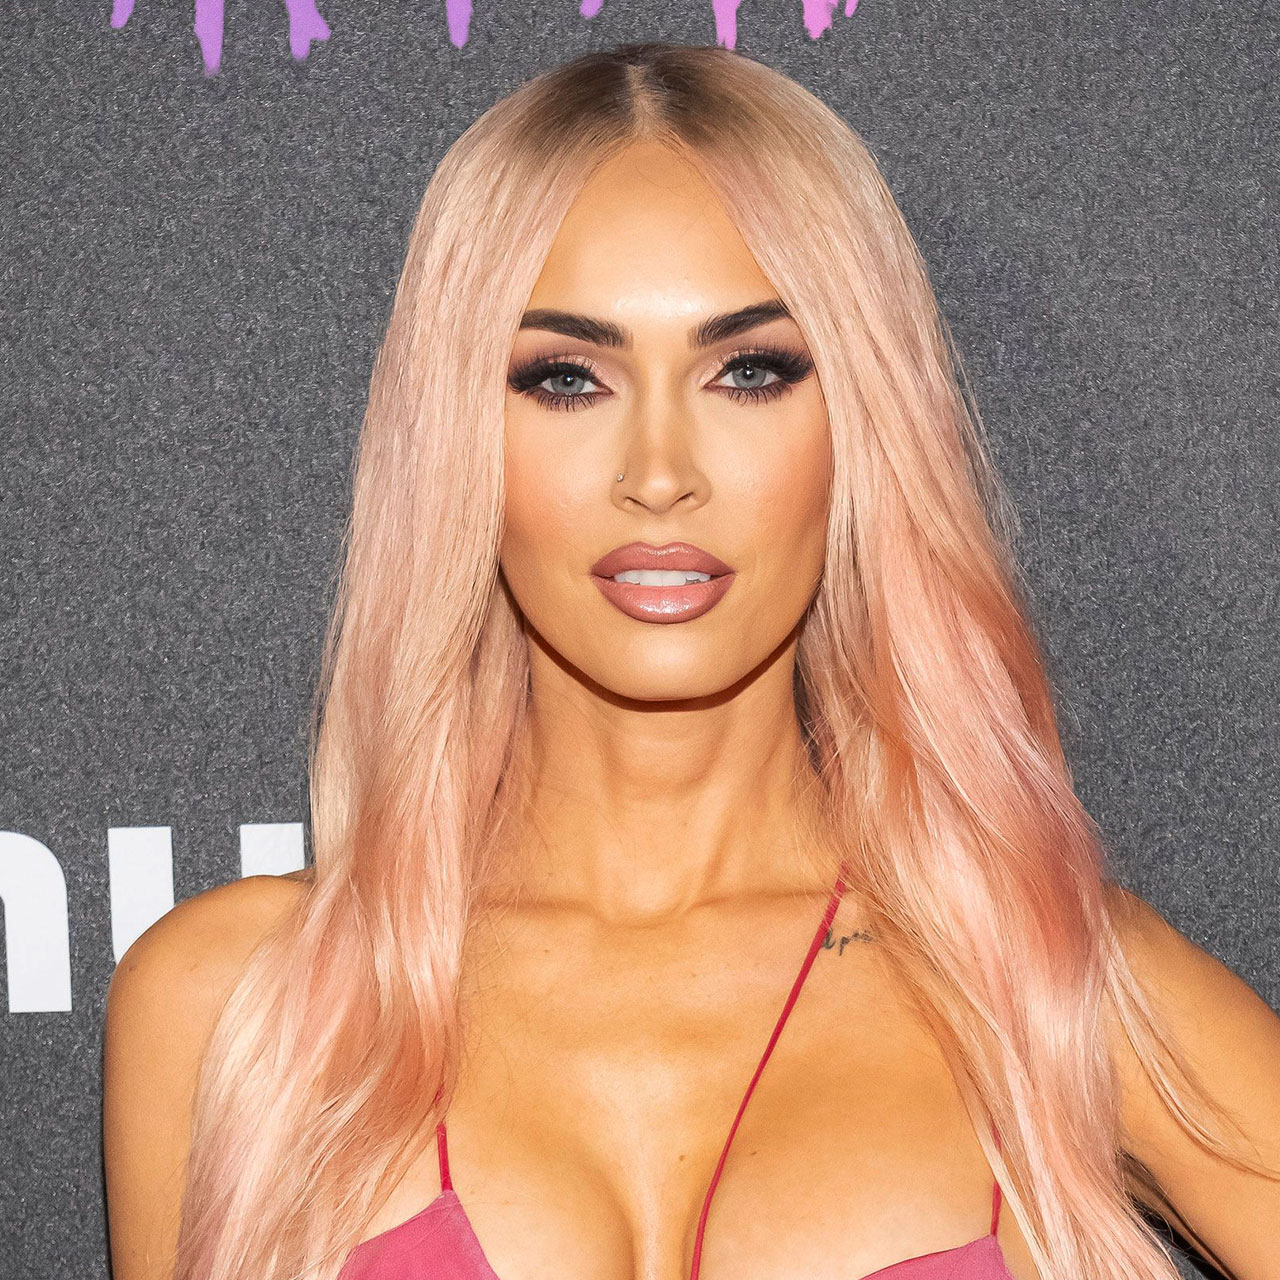 Celebs Are Wearing The Most Insane Push-Up Bras On Instagram